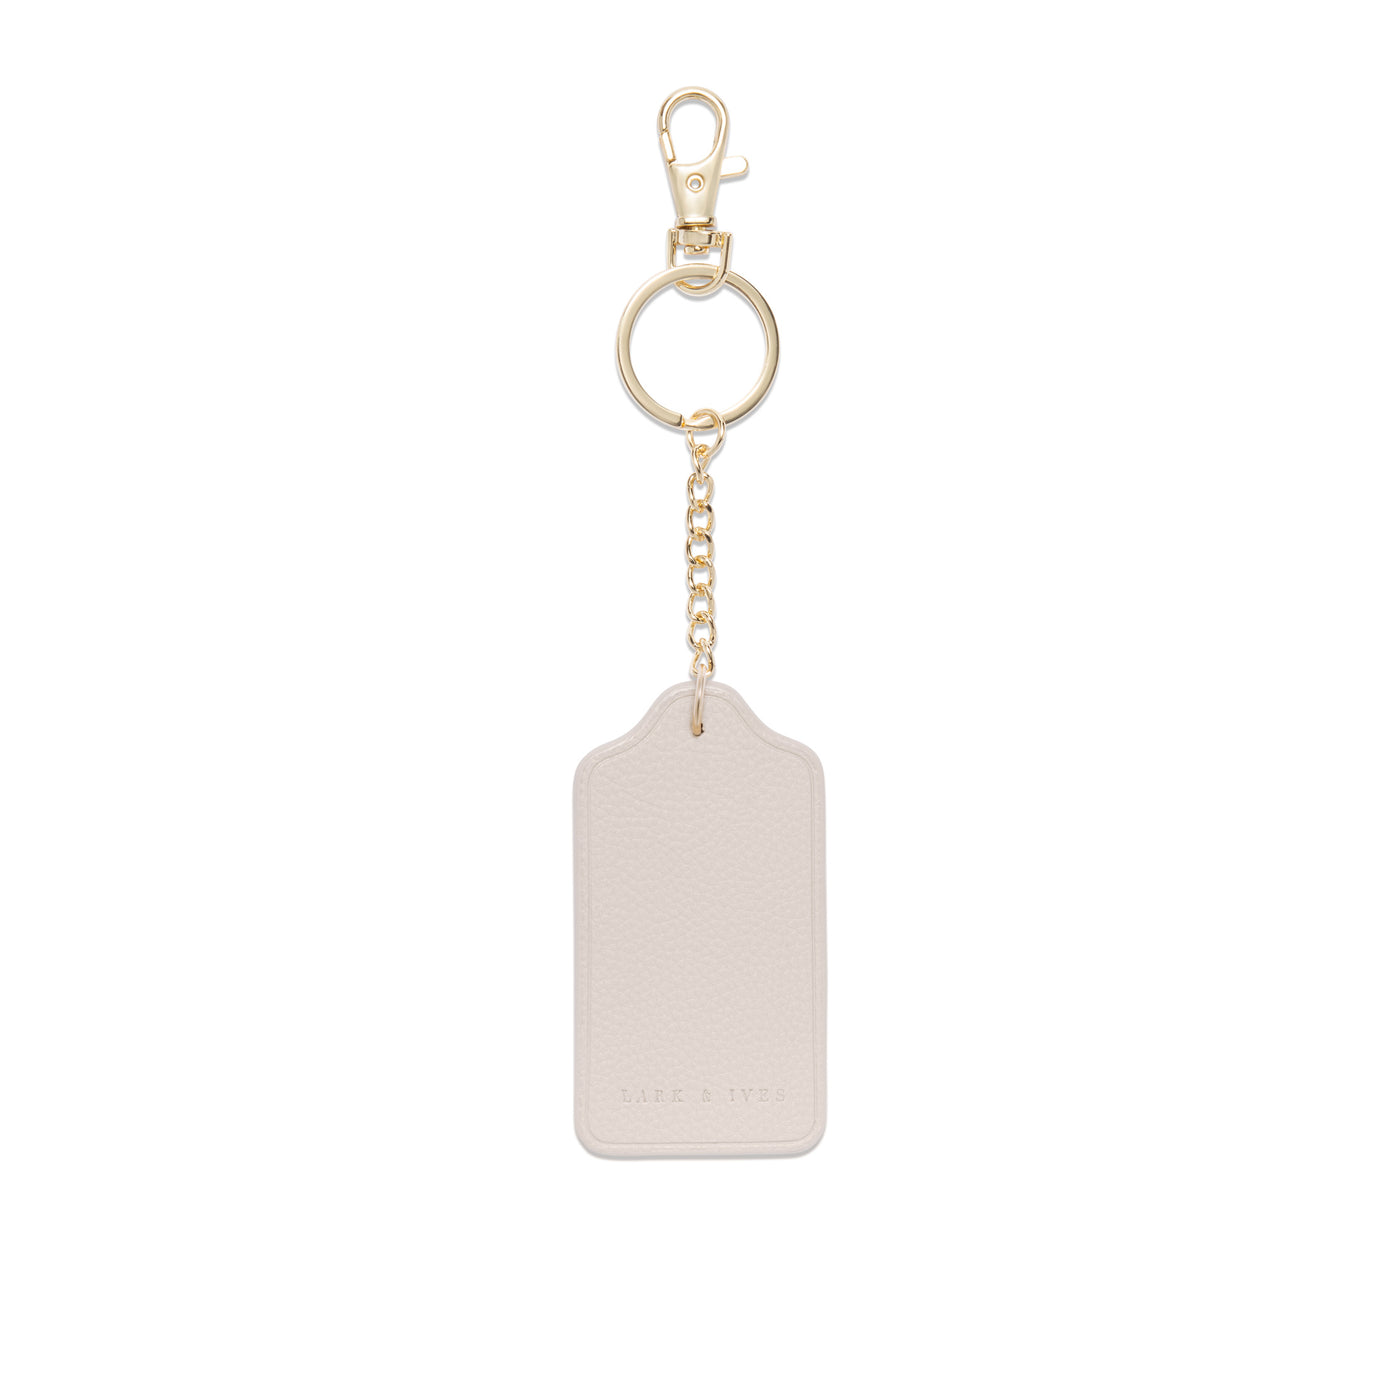 Lark and Ives / Vegan Leather Accessories / Keychain / Keyring / Tag Keychain / Minimal Accessories / Light Beige